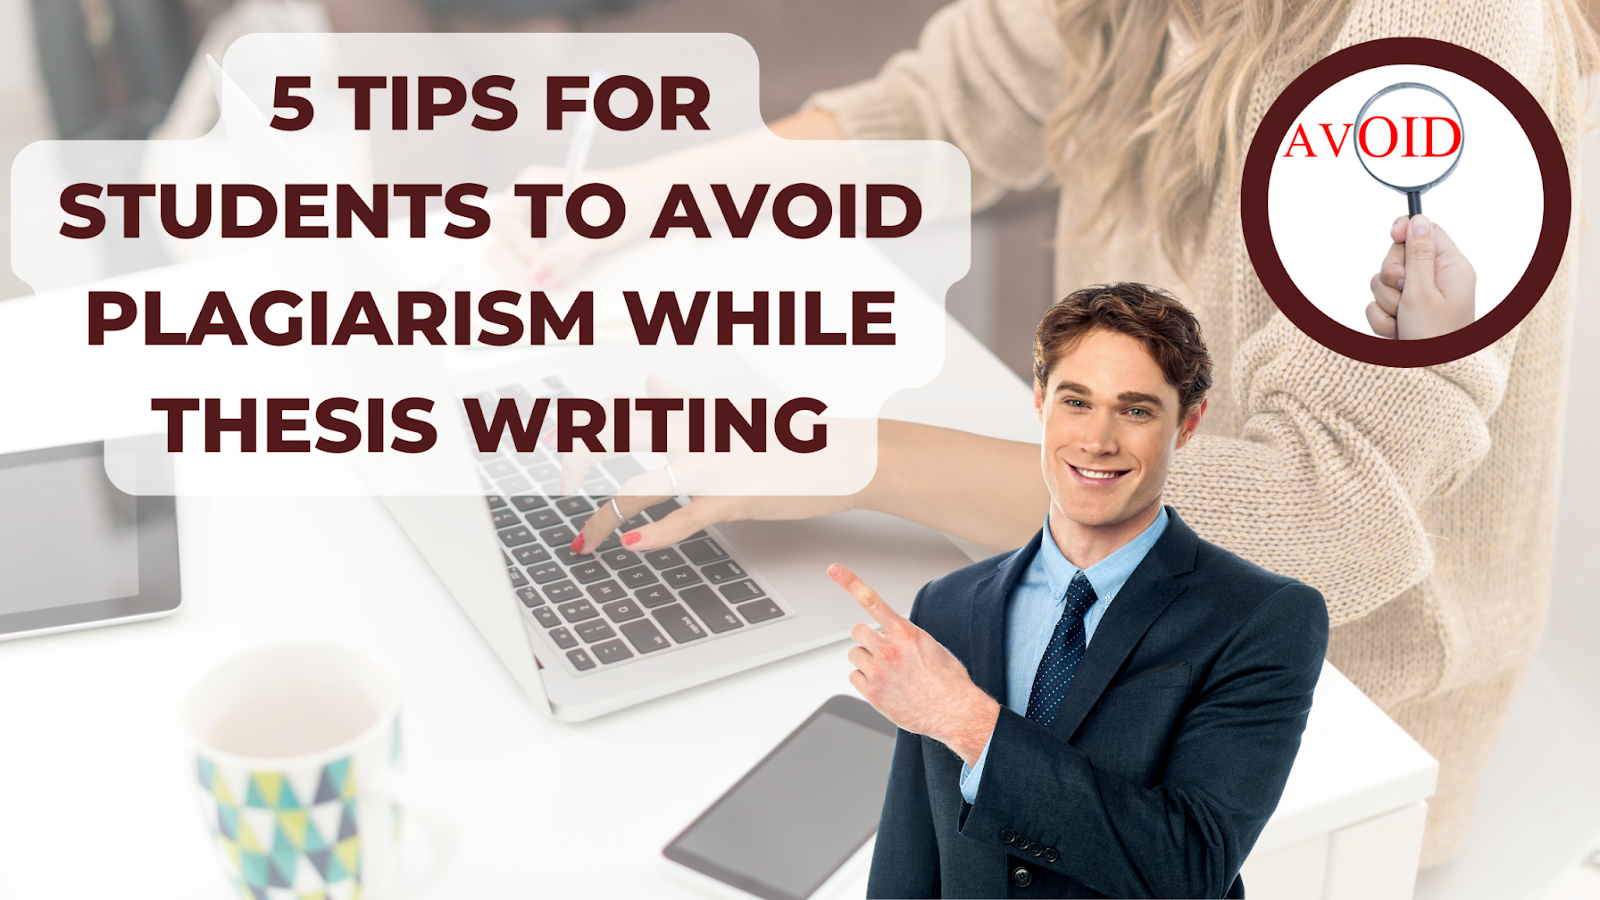 5 Tips for Students to Avoid Plagiarism While Thesis Writing